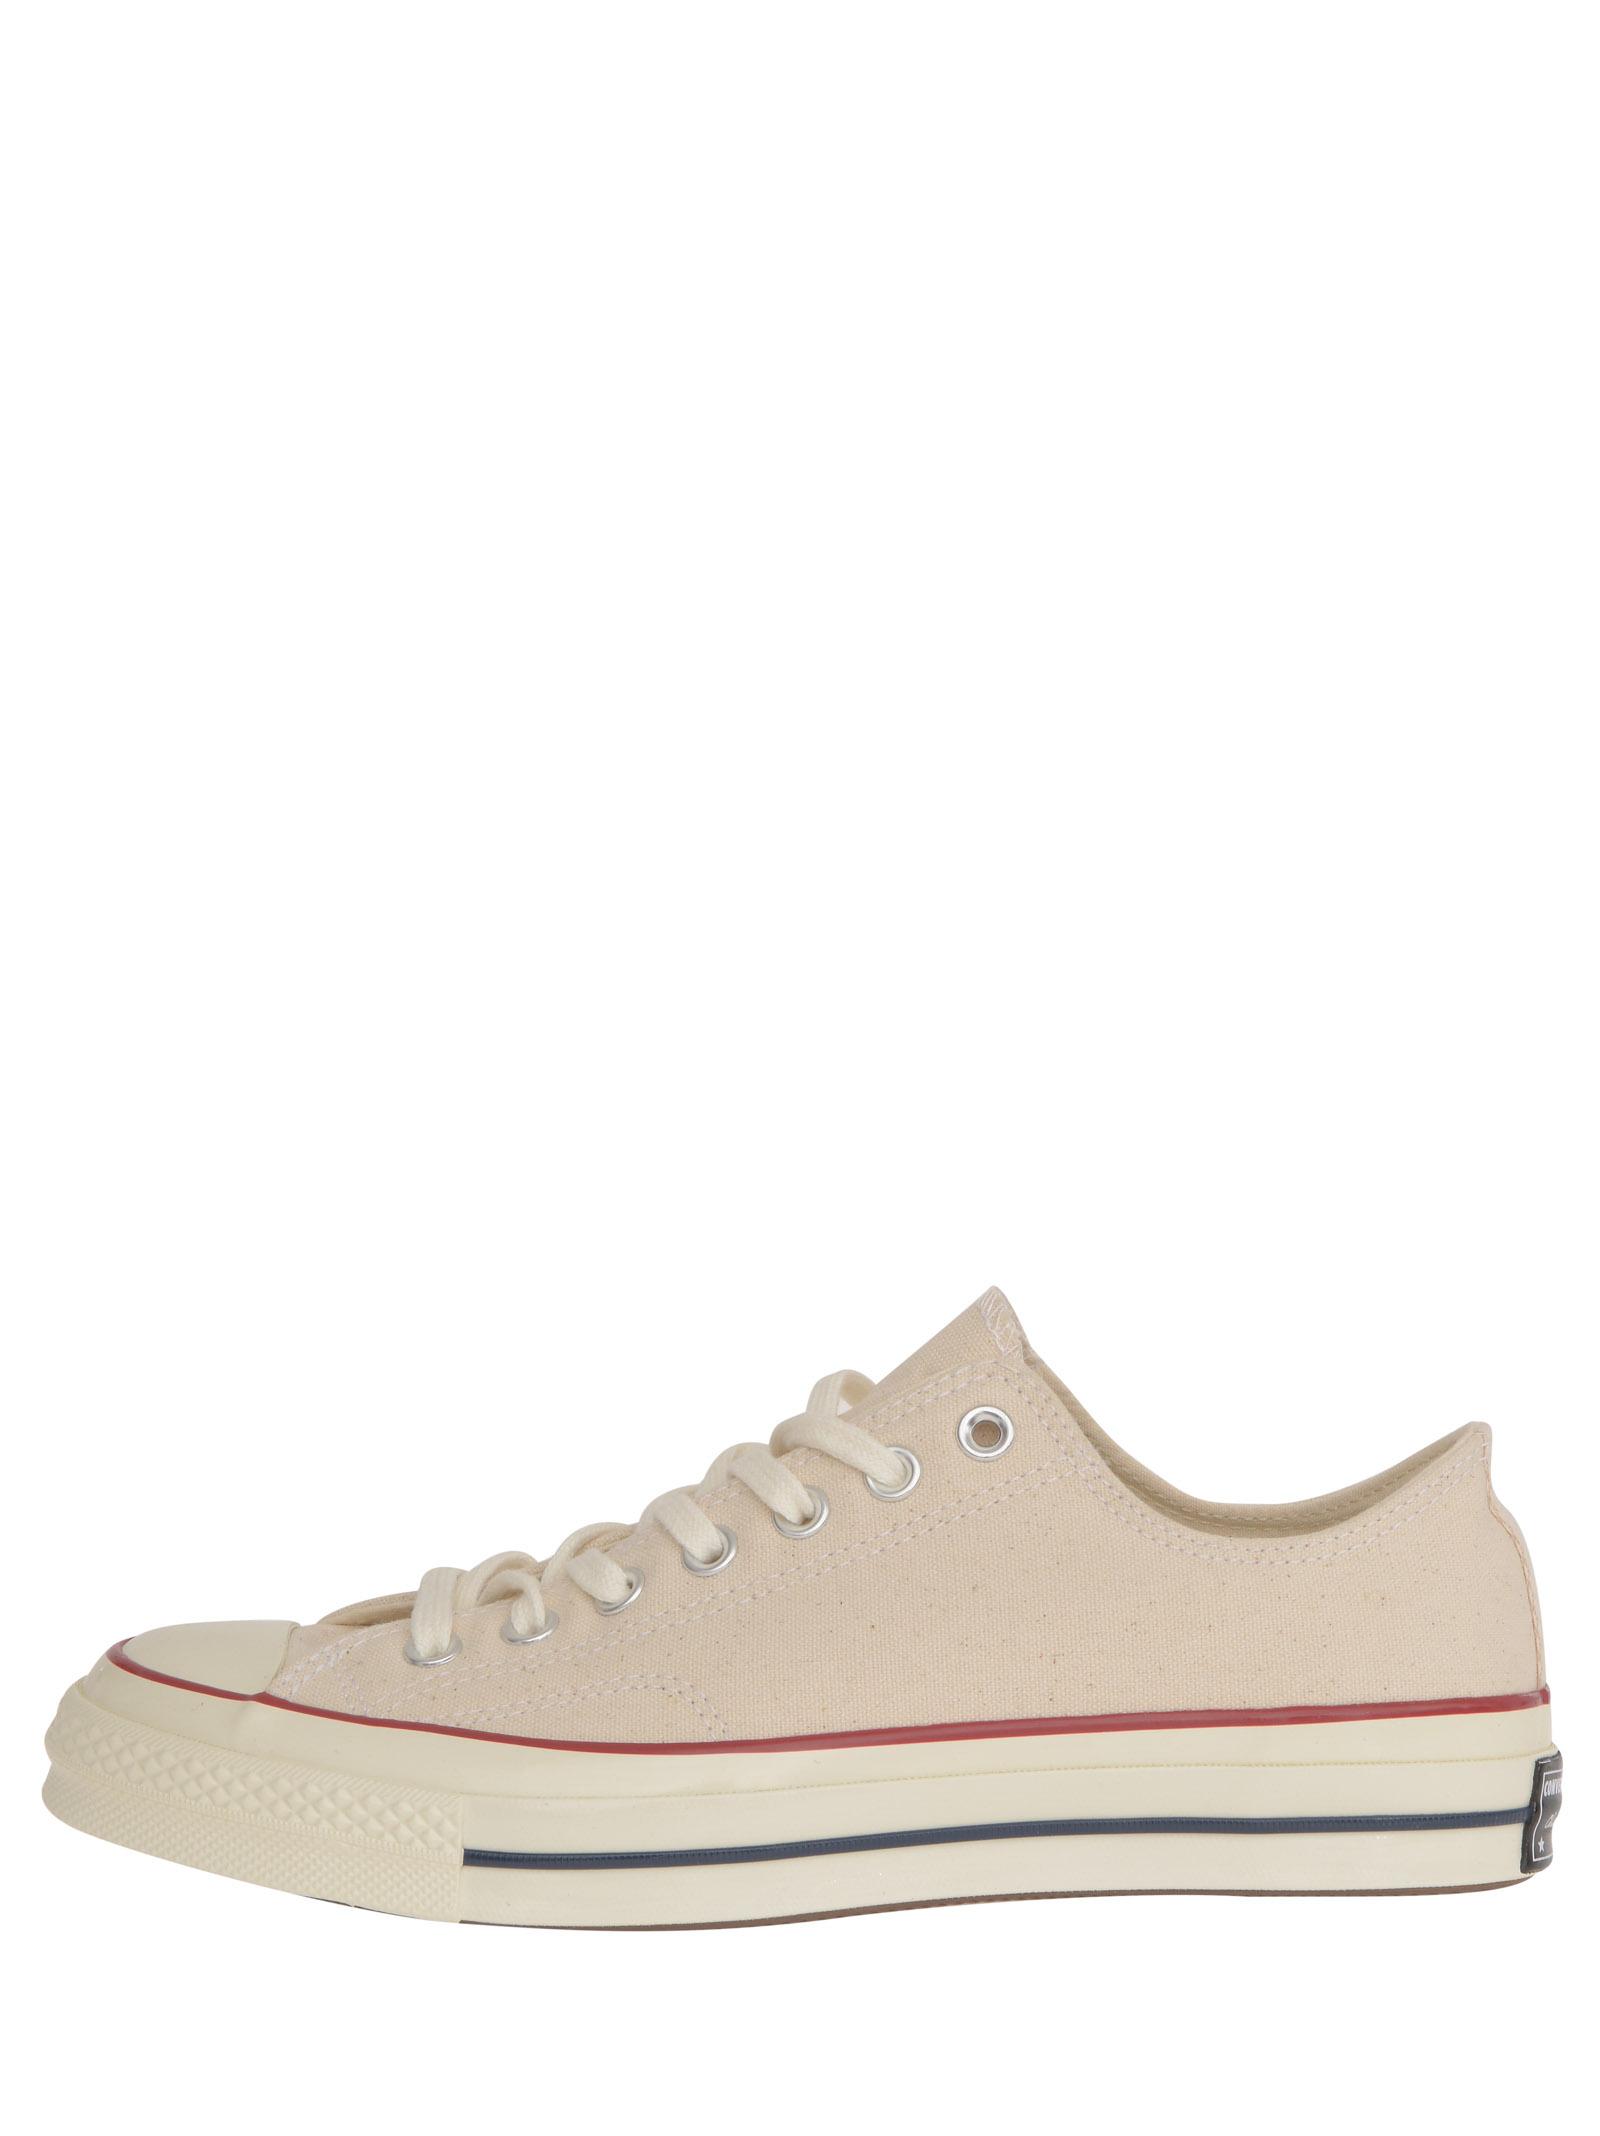 Converse Chuck 70 Ox Cream-white Cotton-canvas Low-top Sneakers With Back  Logo Patch in Beige (Natural) for Men - Lyst